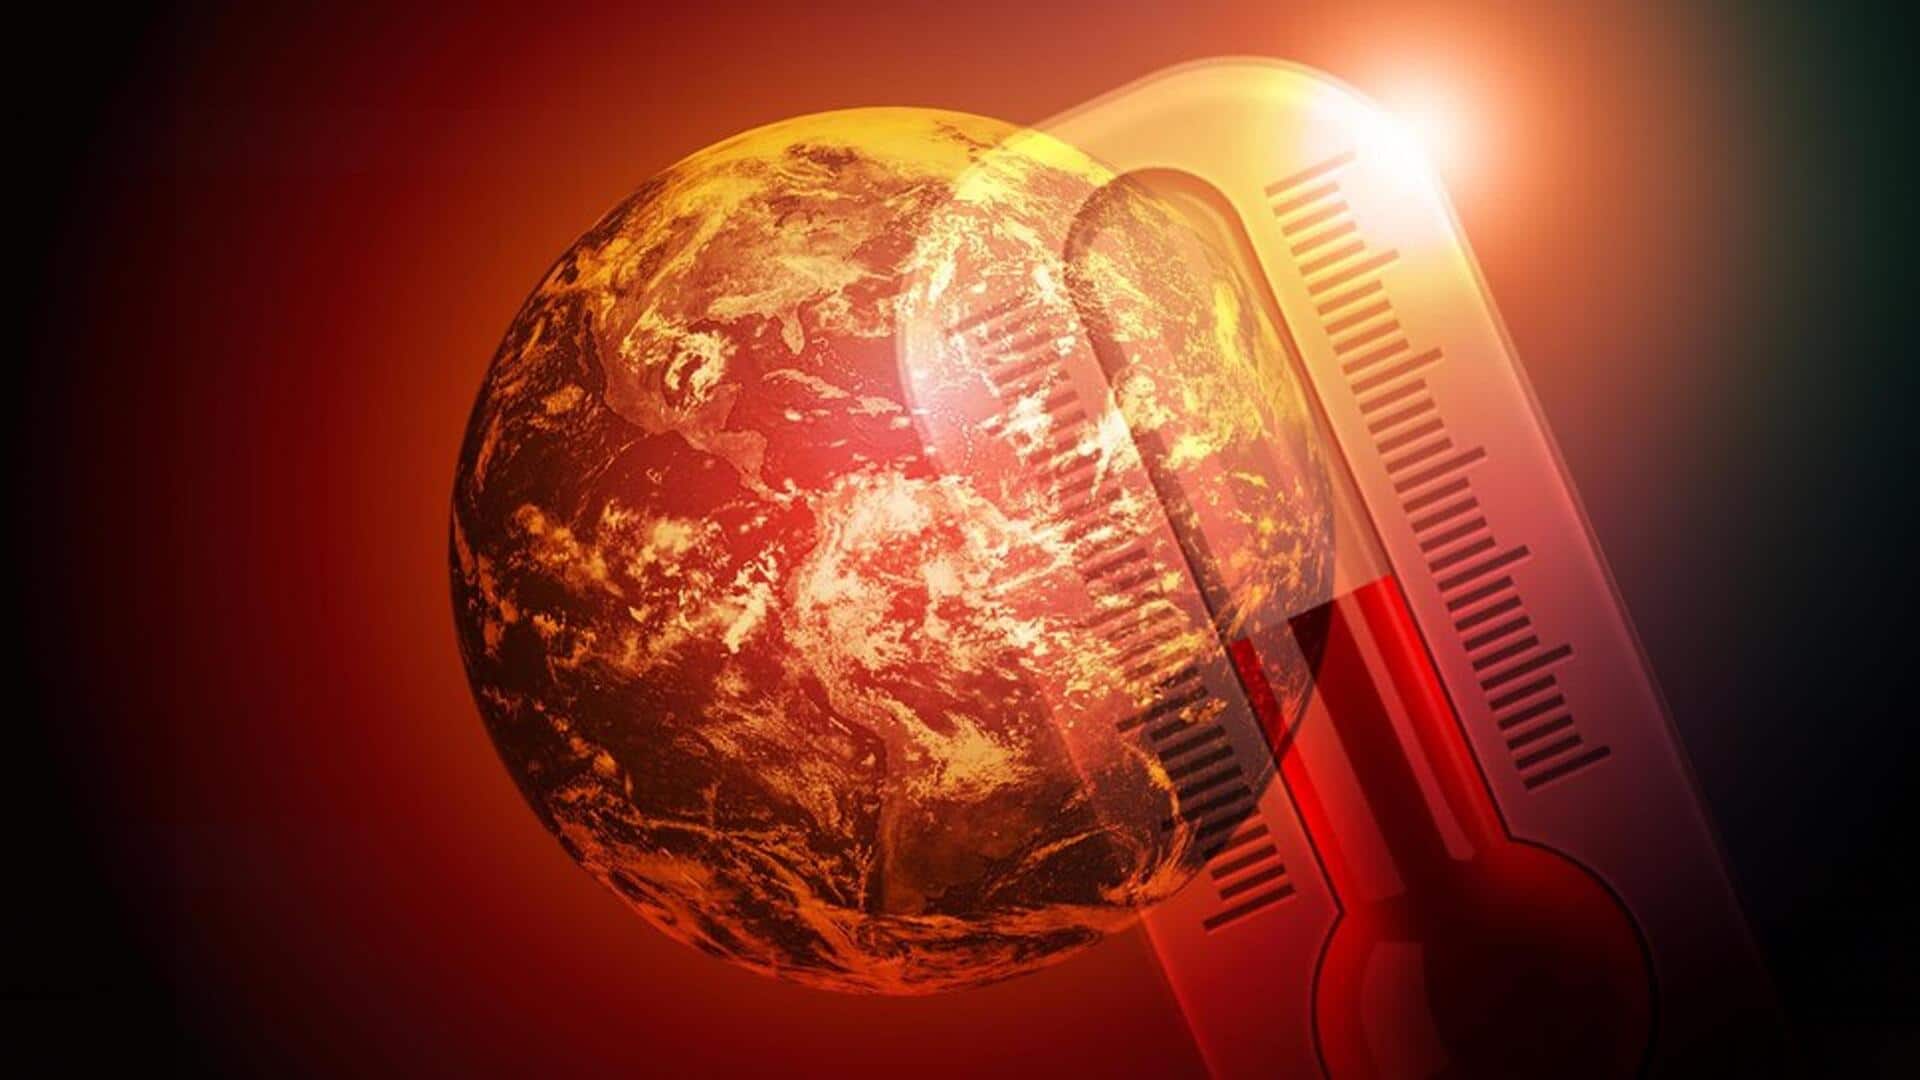 Not just Delhi, temperatures across the world are soaring 